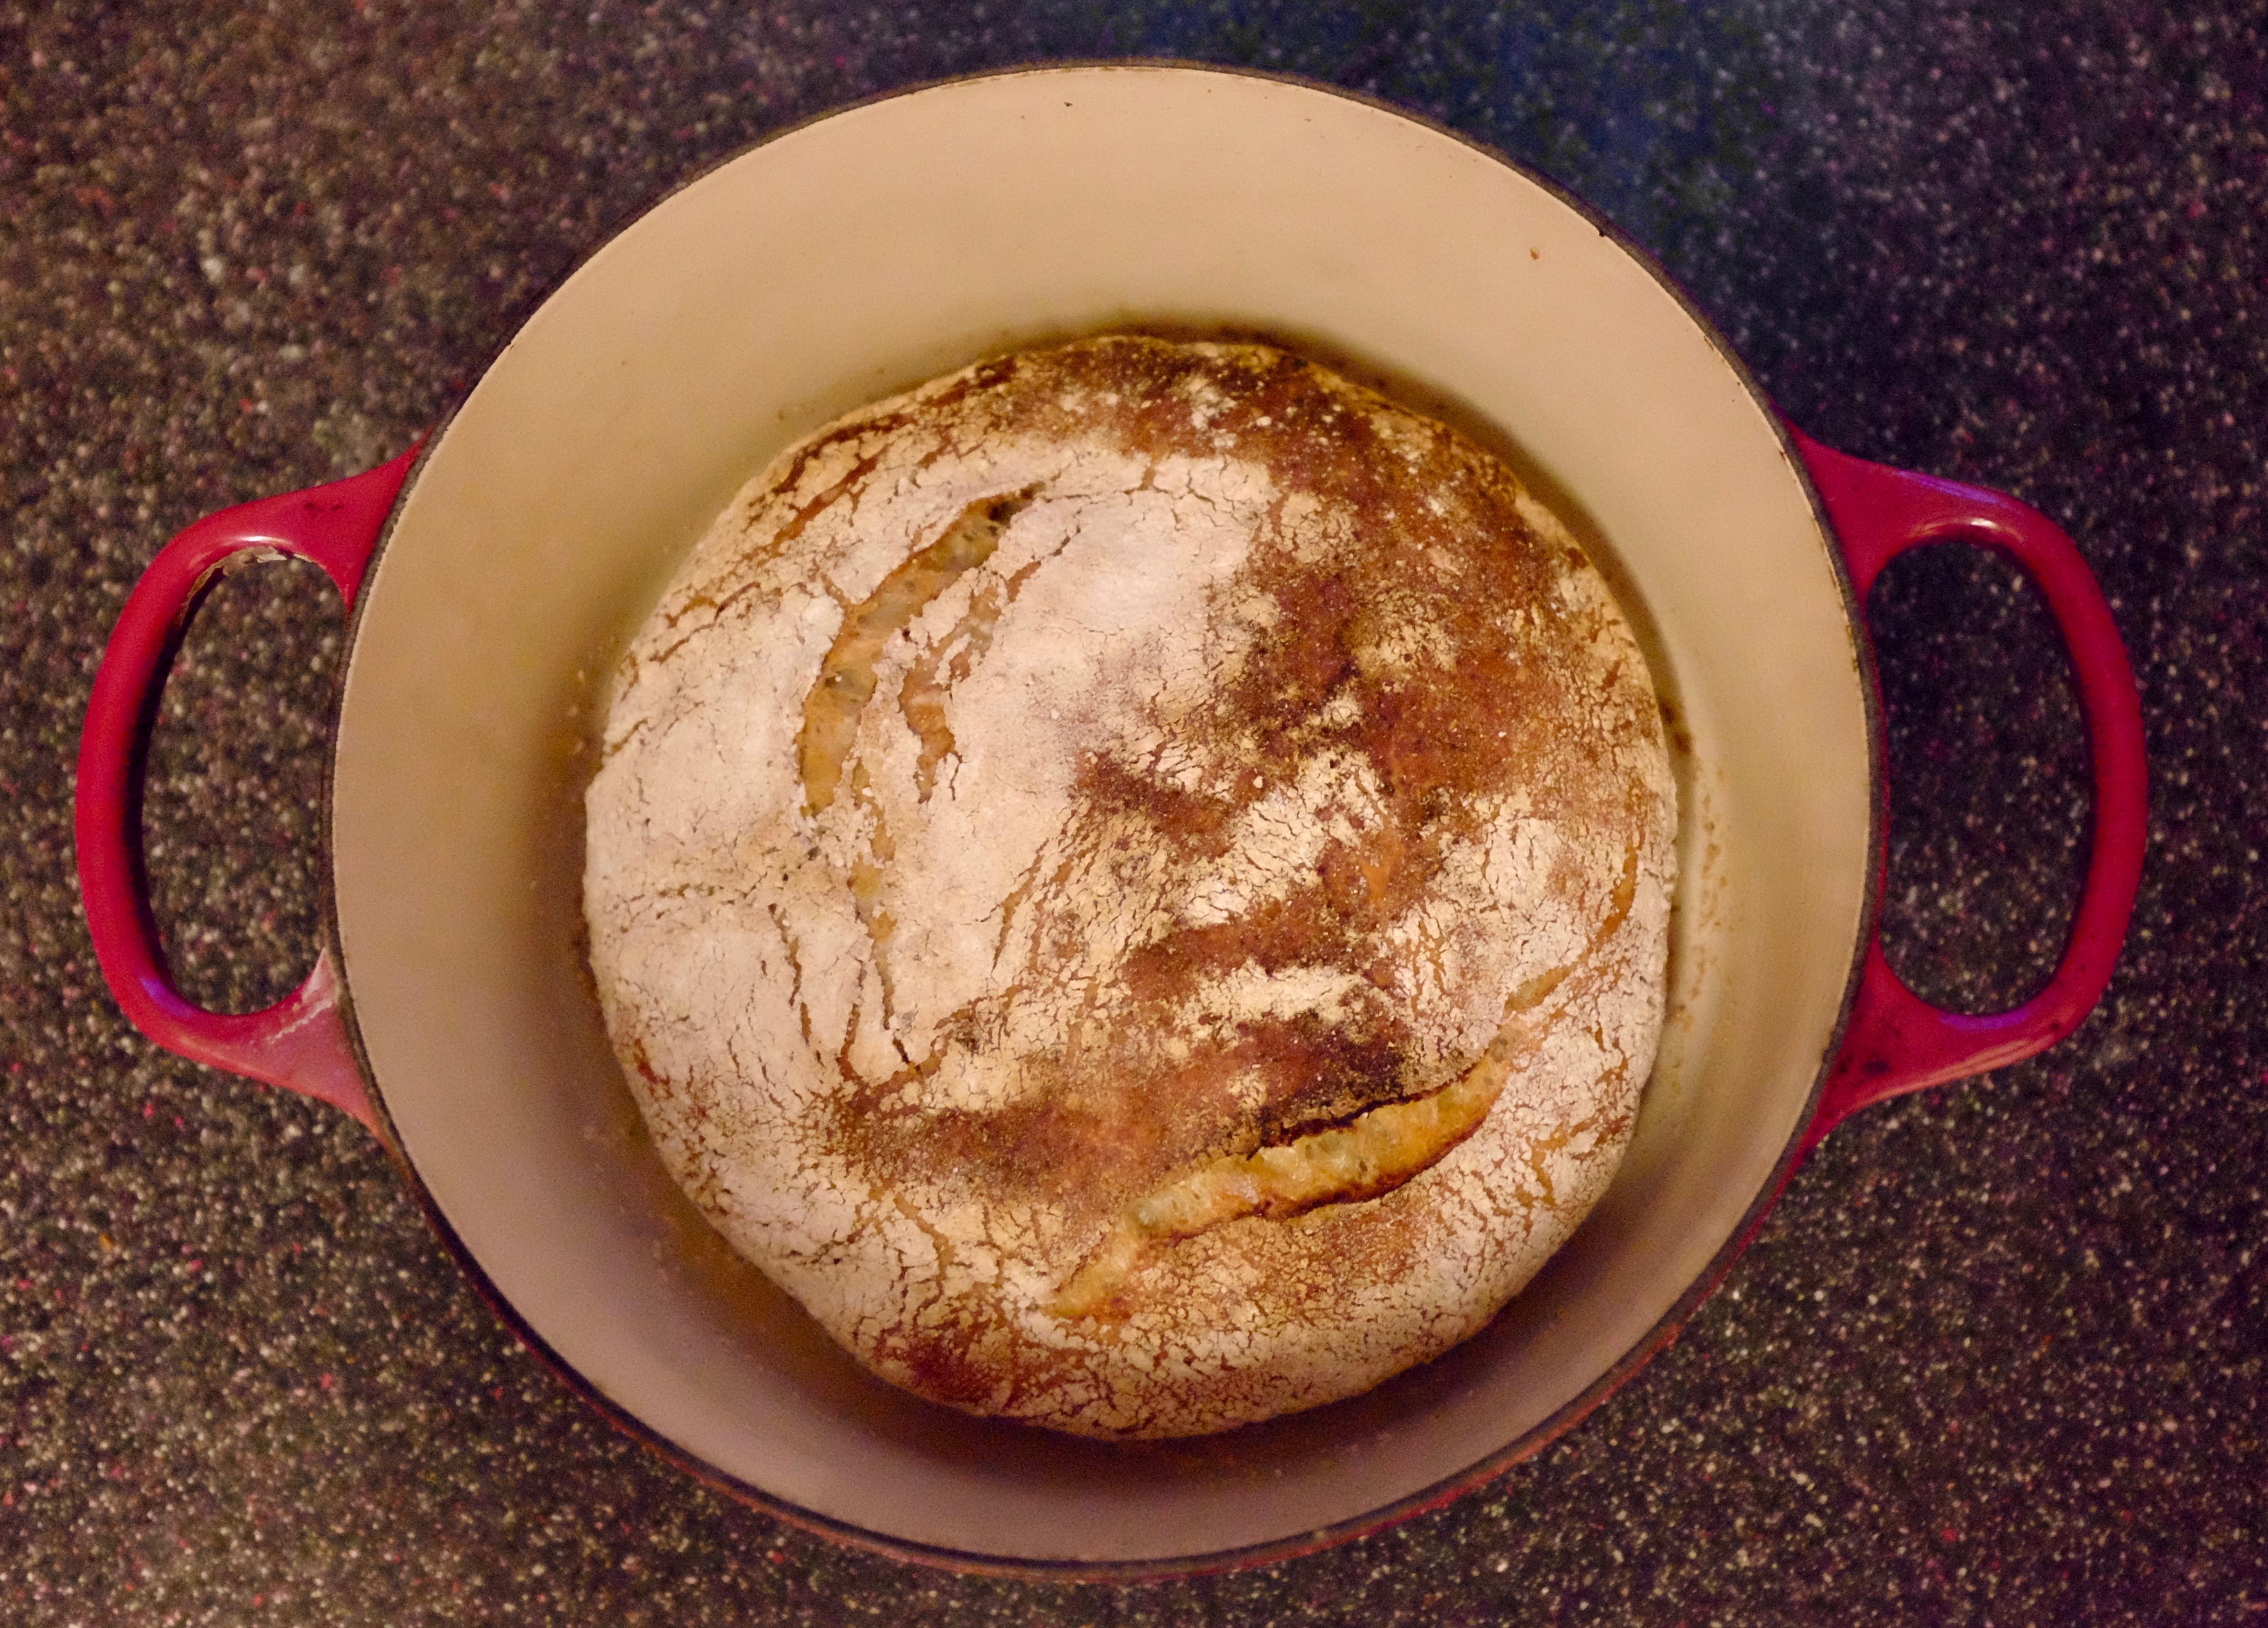 An image of a bread called “No-Knead Bread”